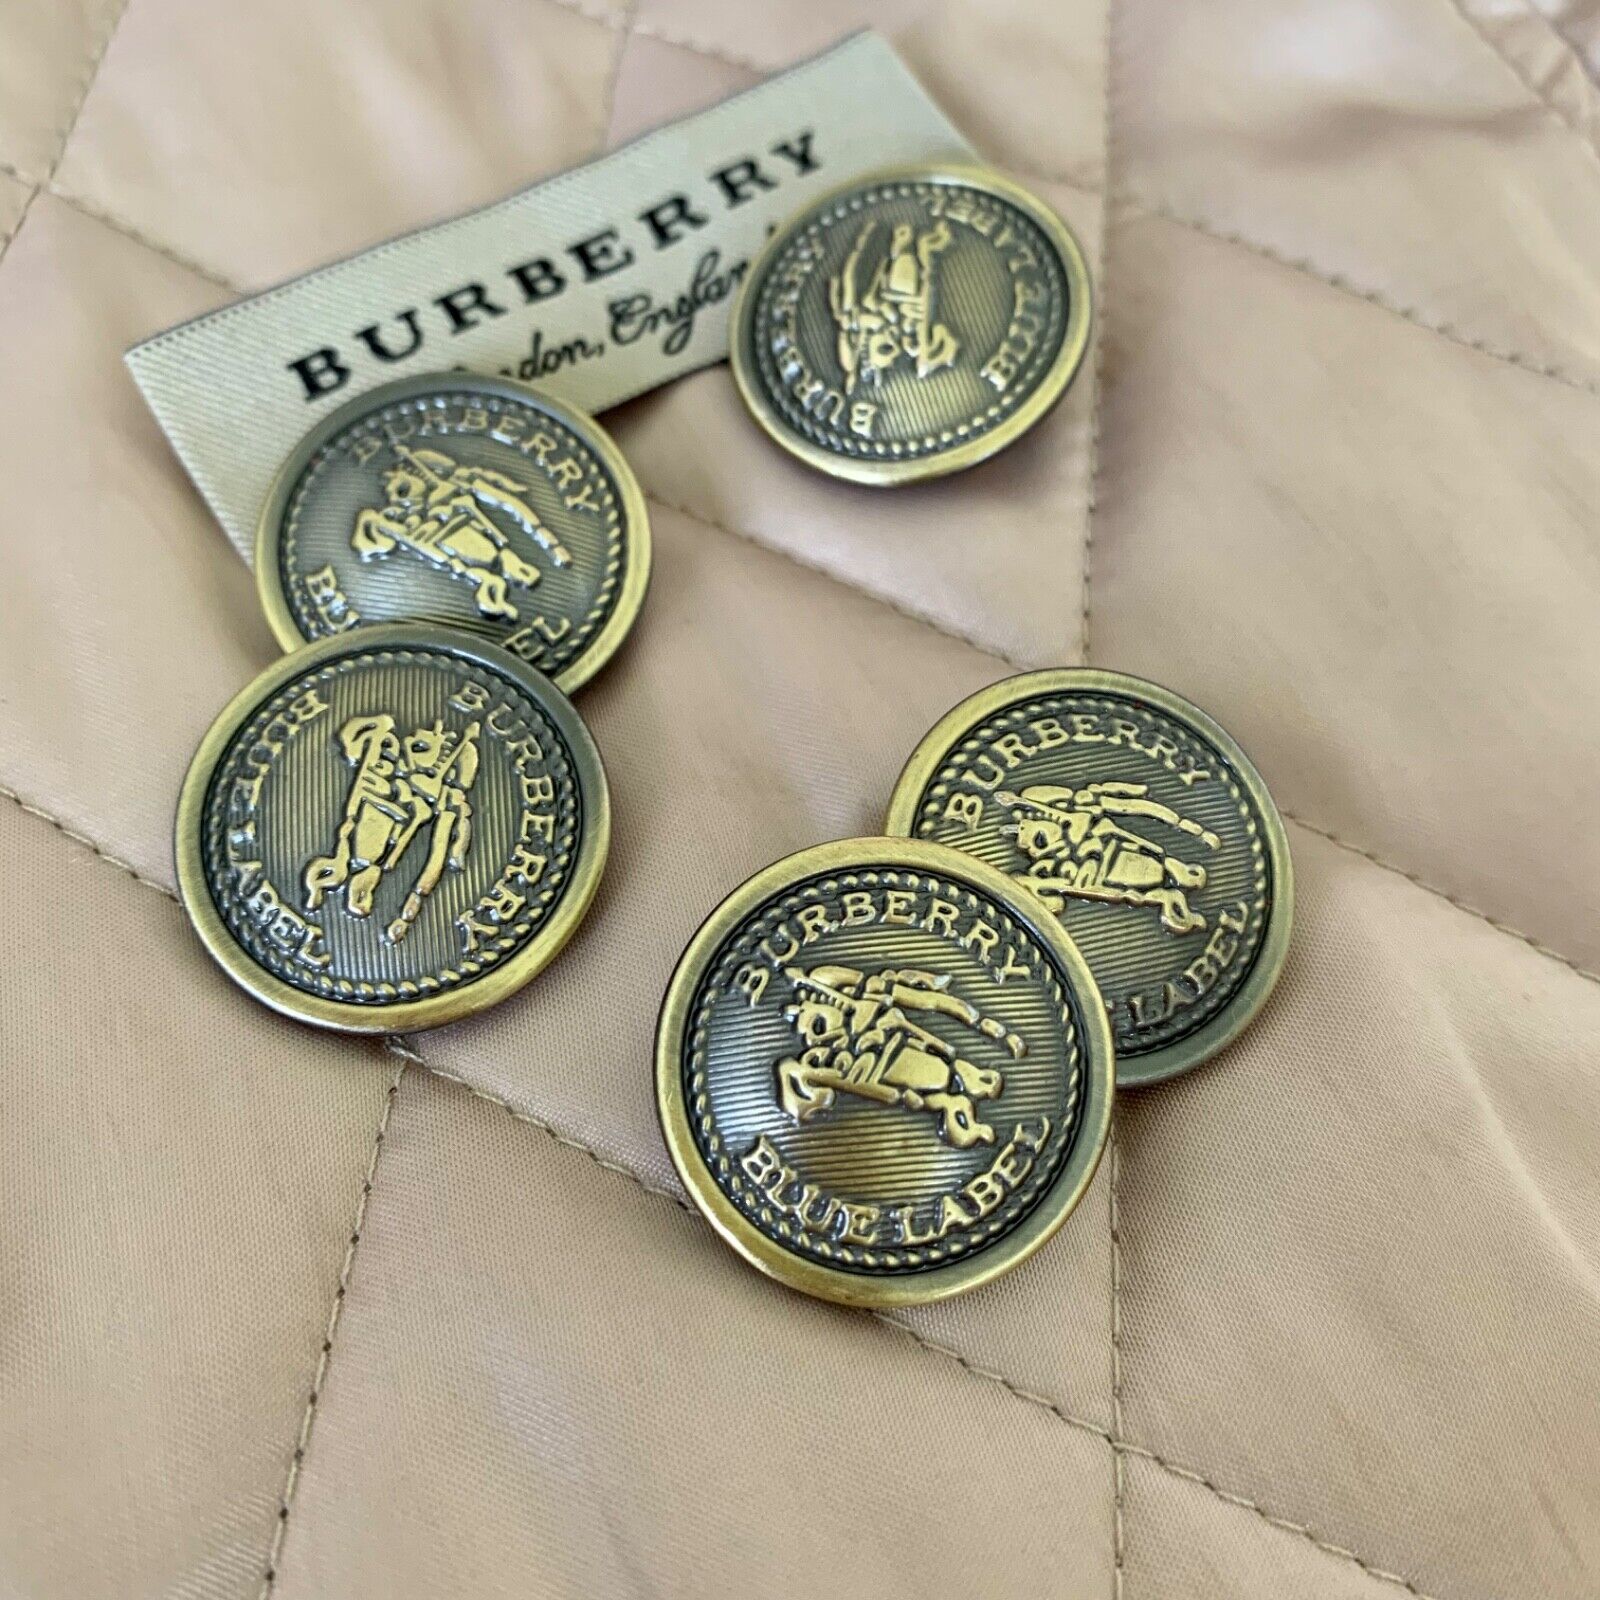 Burberry buttons (set of 5) 15 mm